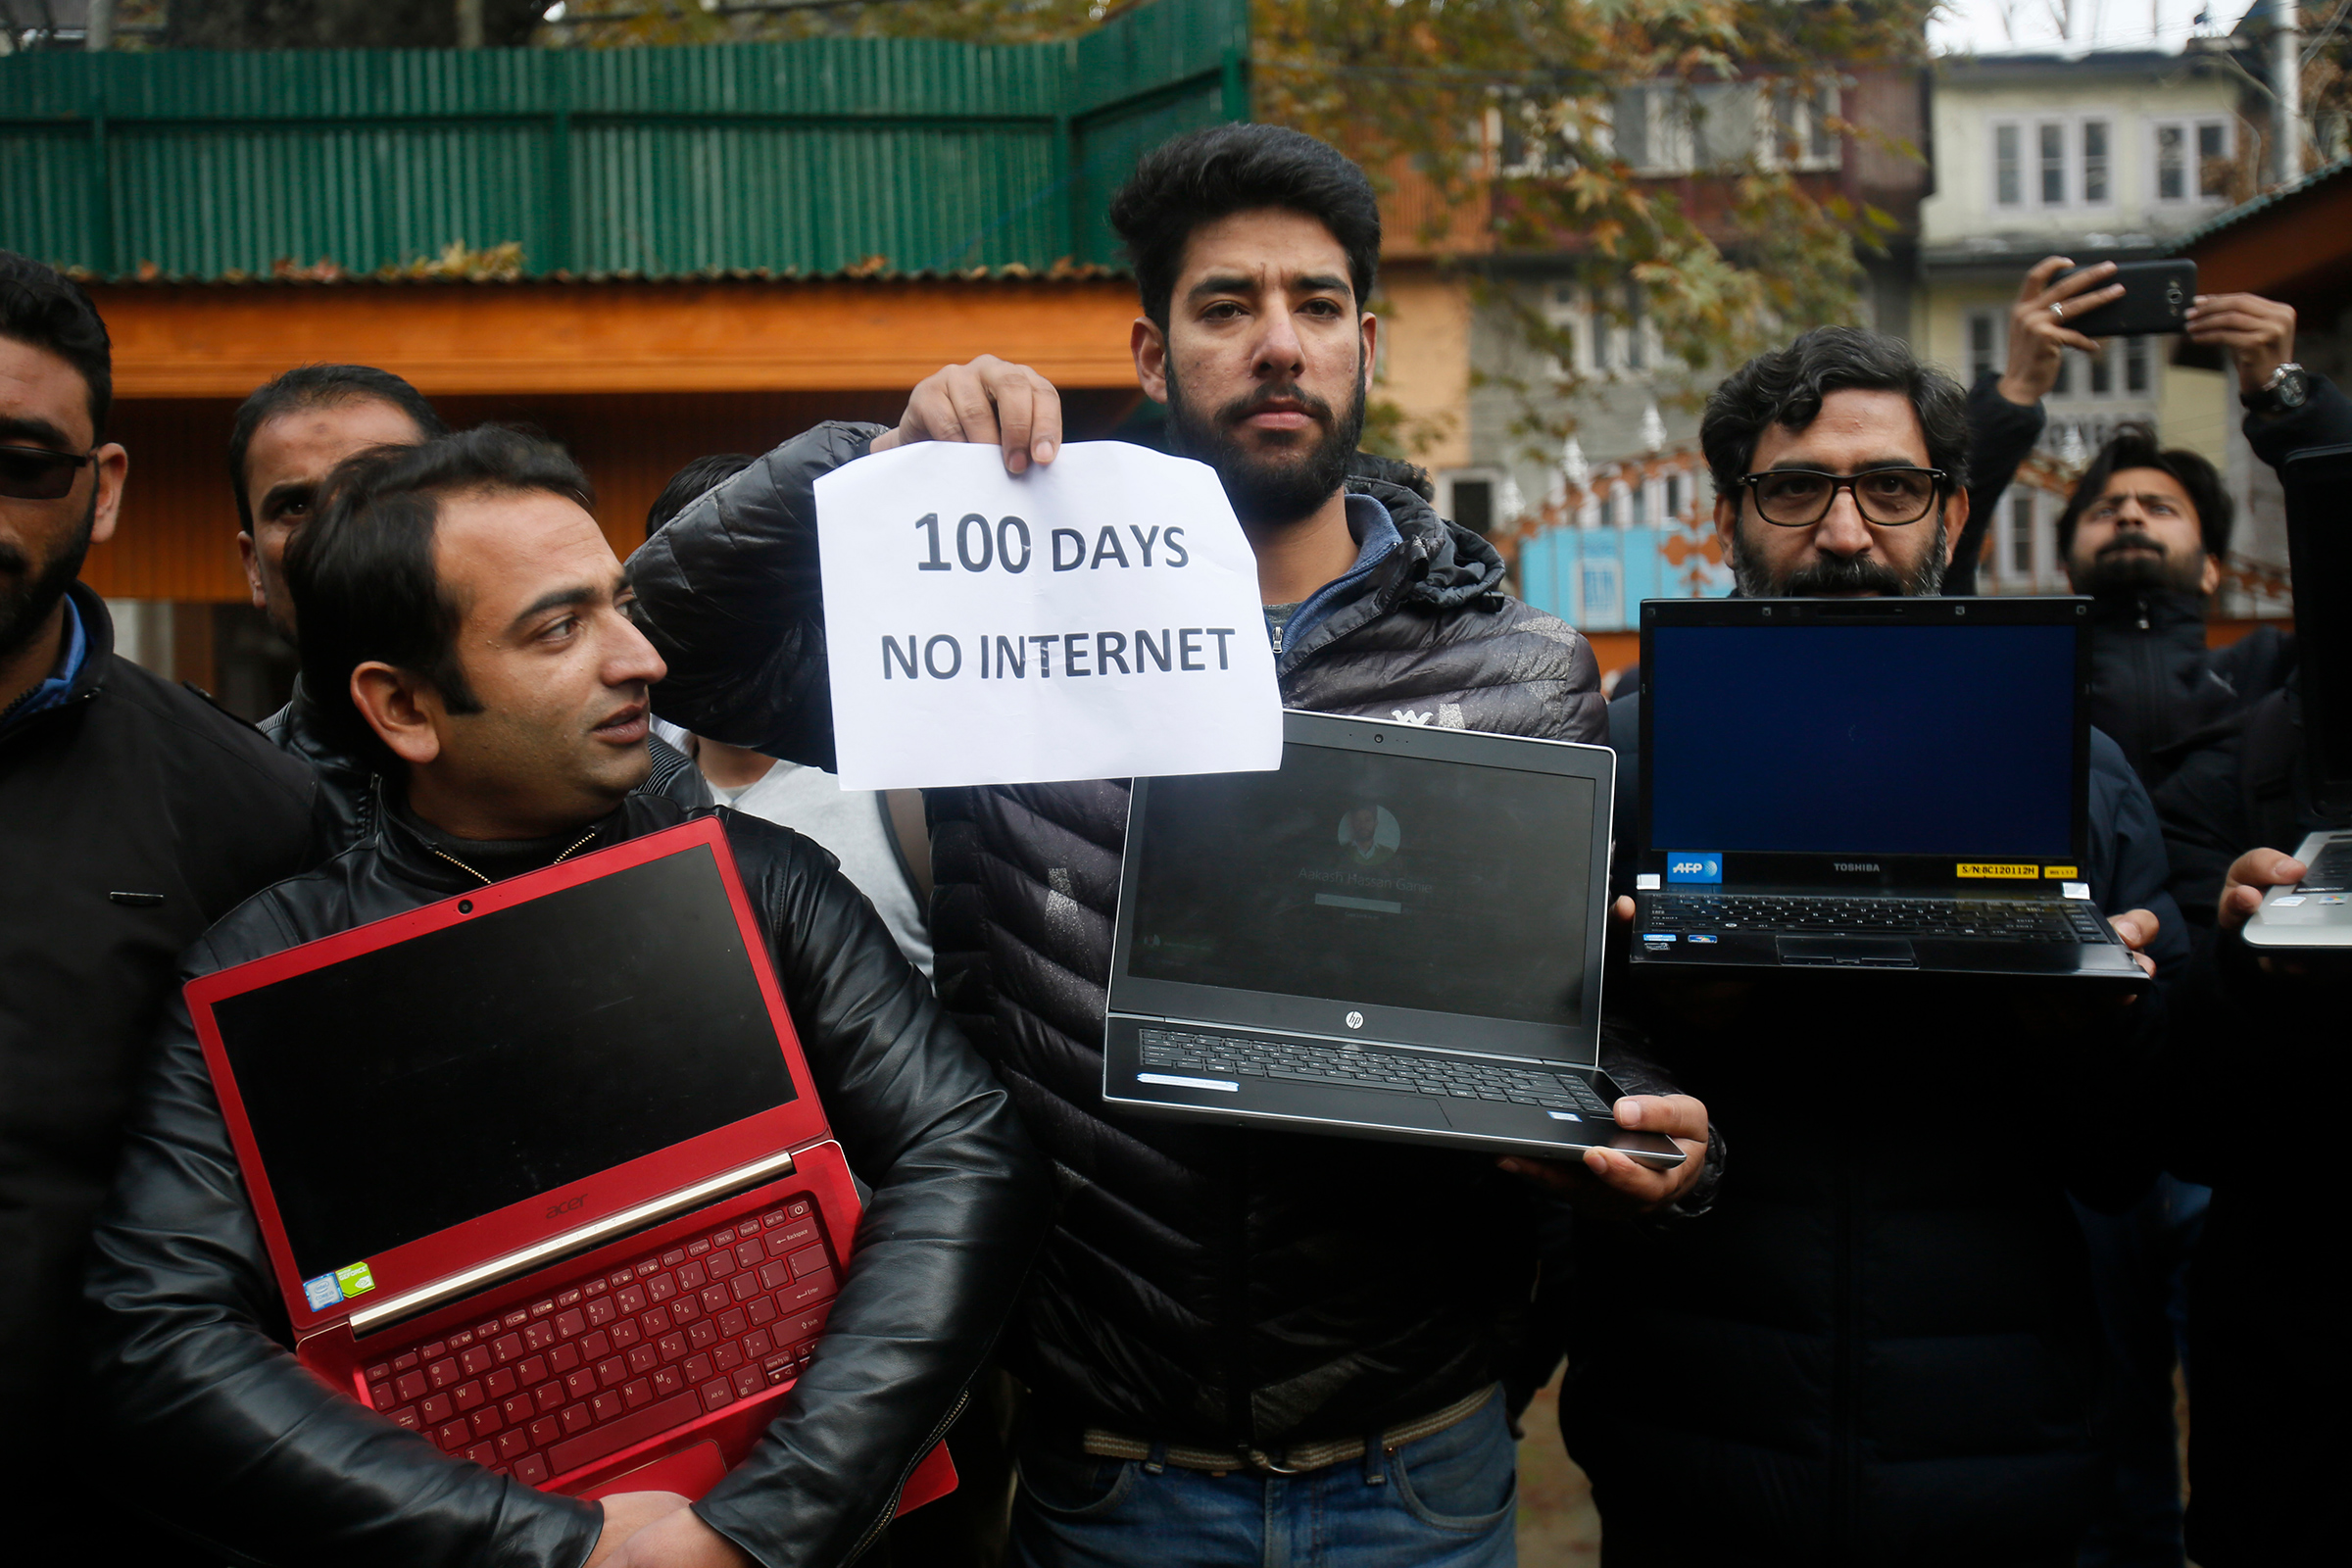 Kashmiri journalists hold placards and protest against 100 days of internet blockade in the region in Srinagar, Indian controlled Kashmir, on Nov. 12, 2019. Internet services have been cut since Aug. 5 when Indian-controlled Kashmir's semi-autonomous status was removed.